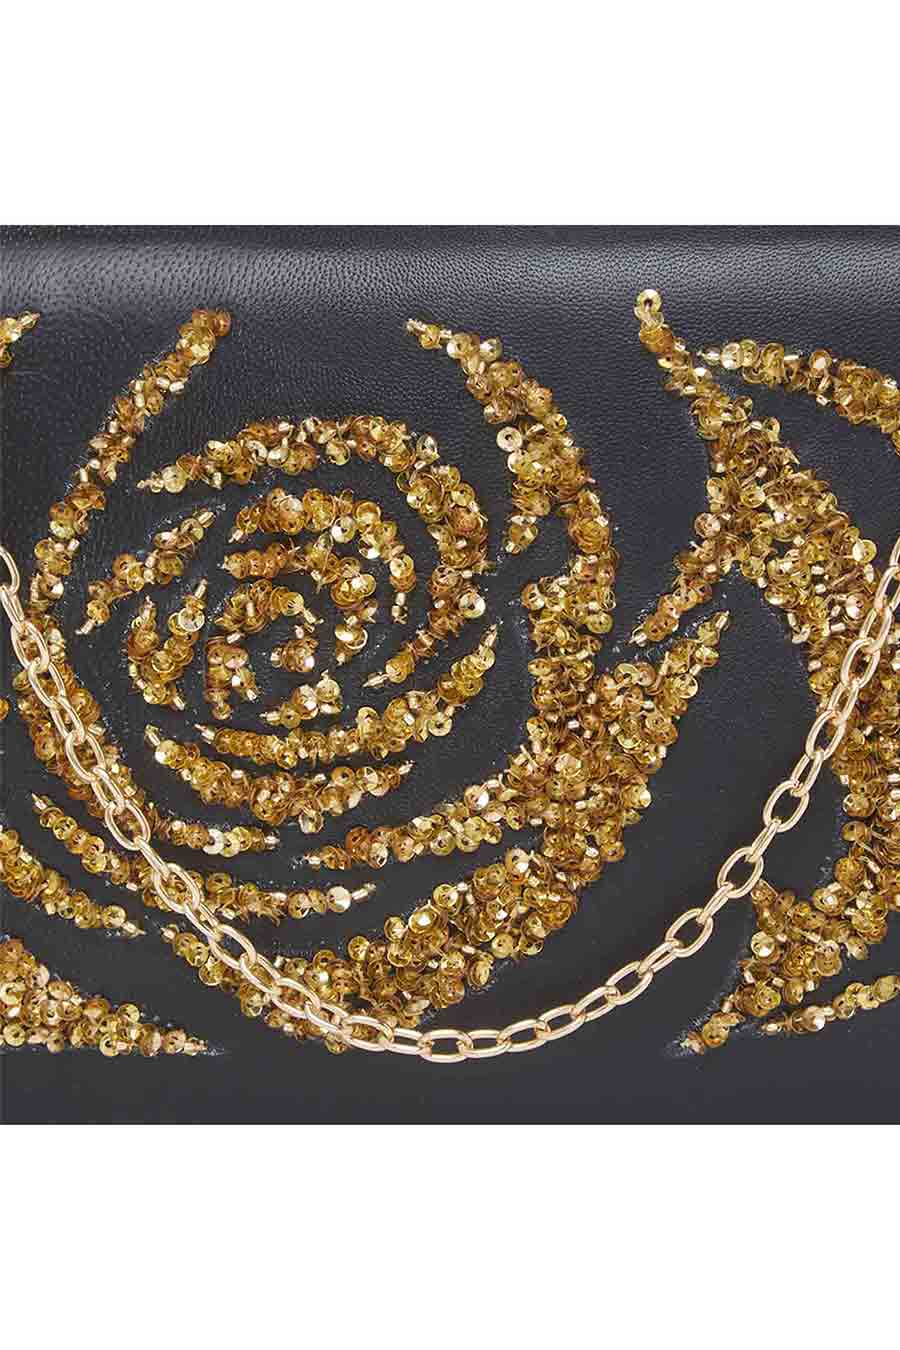 Black Leather Clutch With Gold Rose